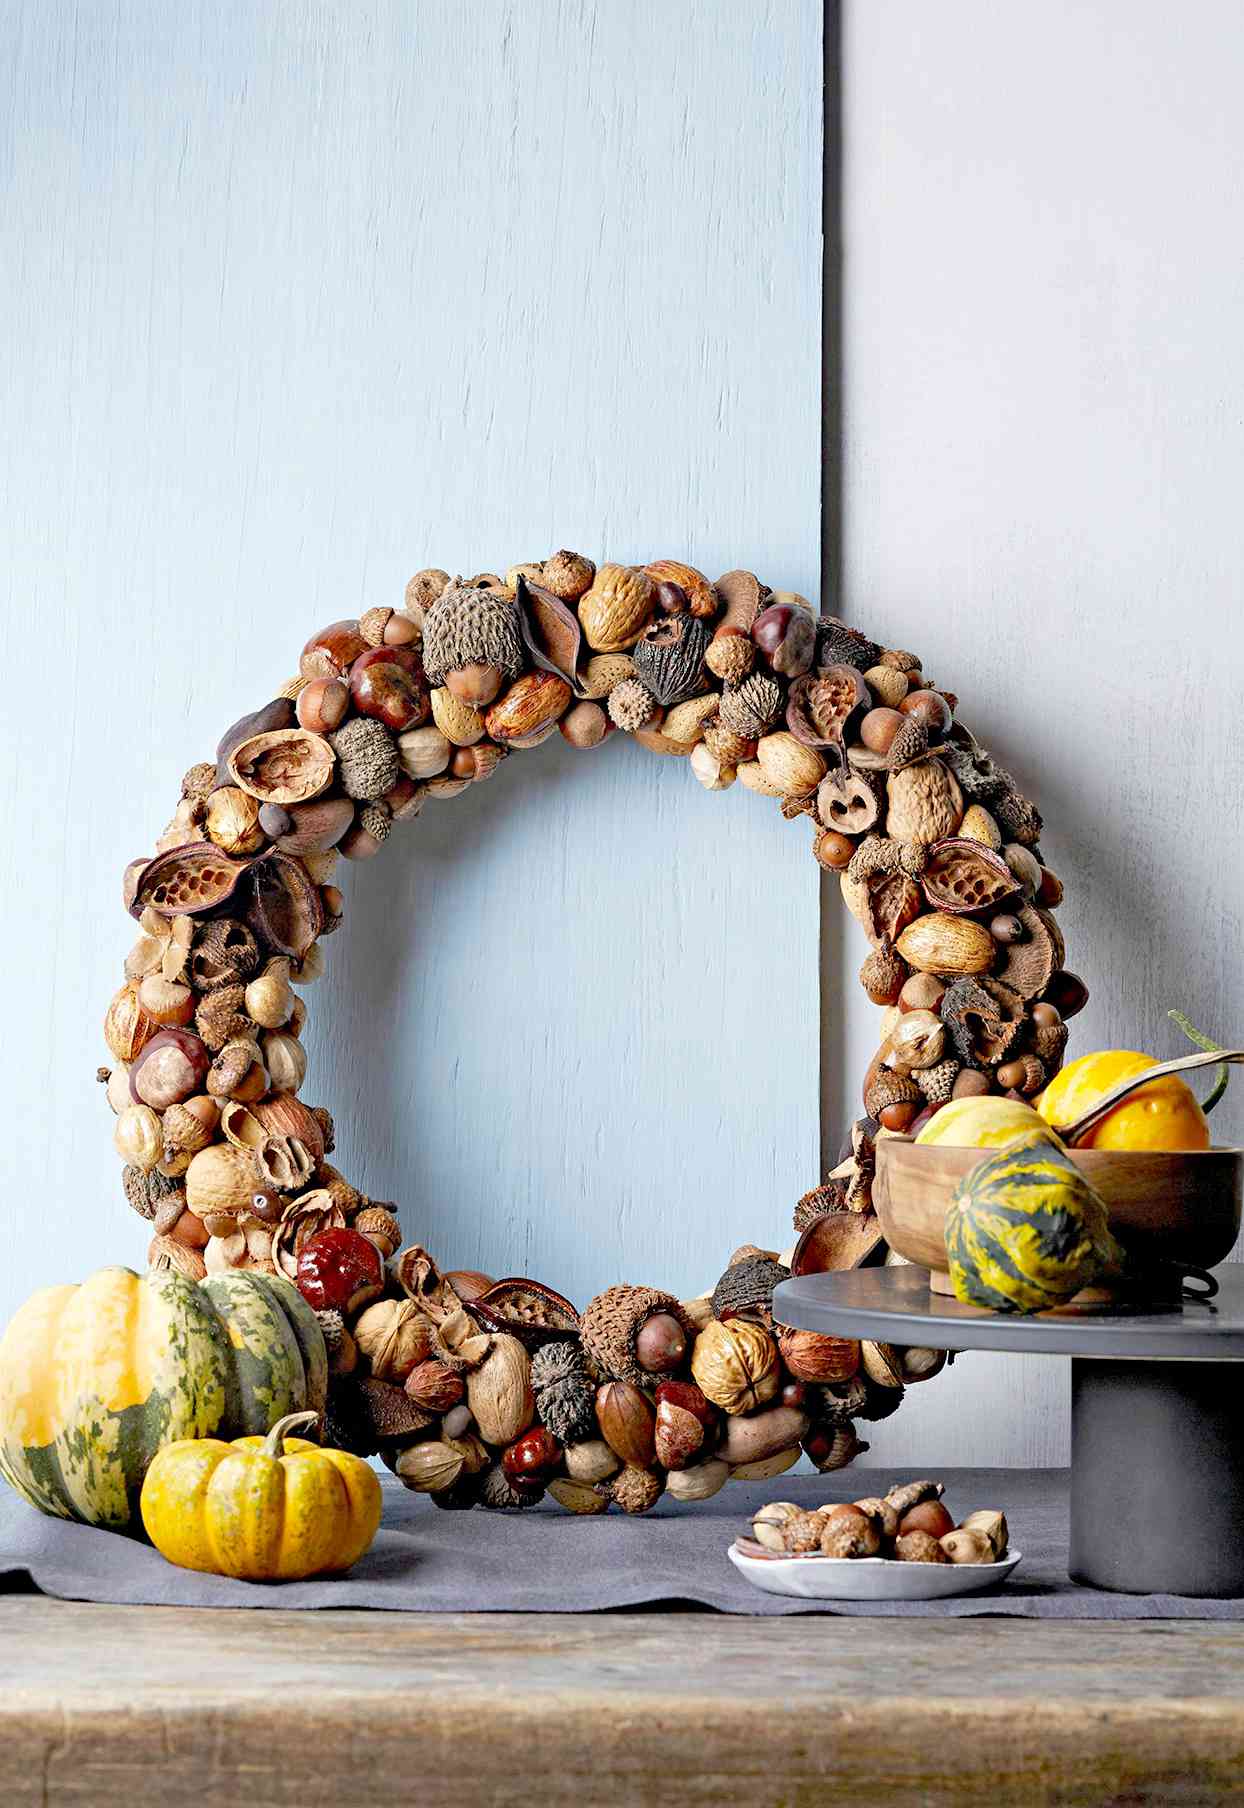 Wreath of nut shells with pumpkins